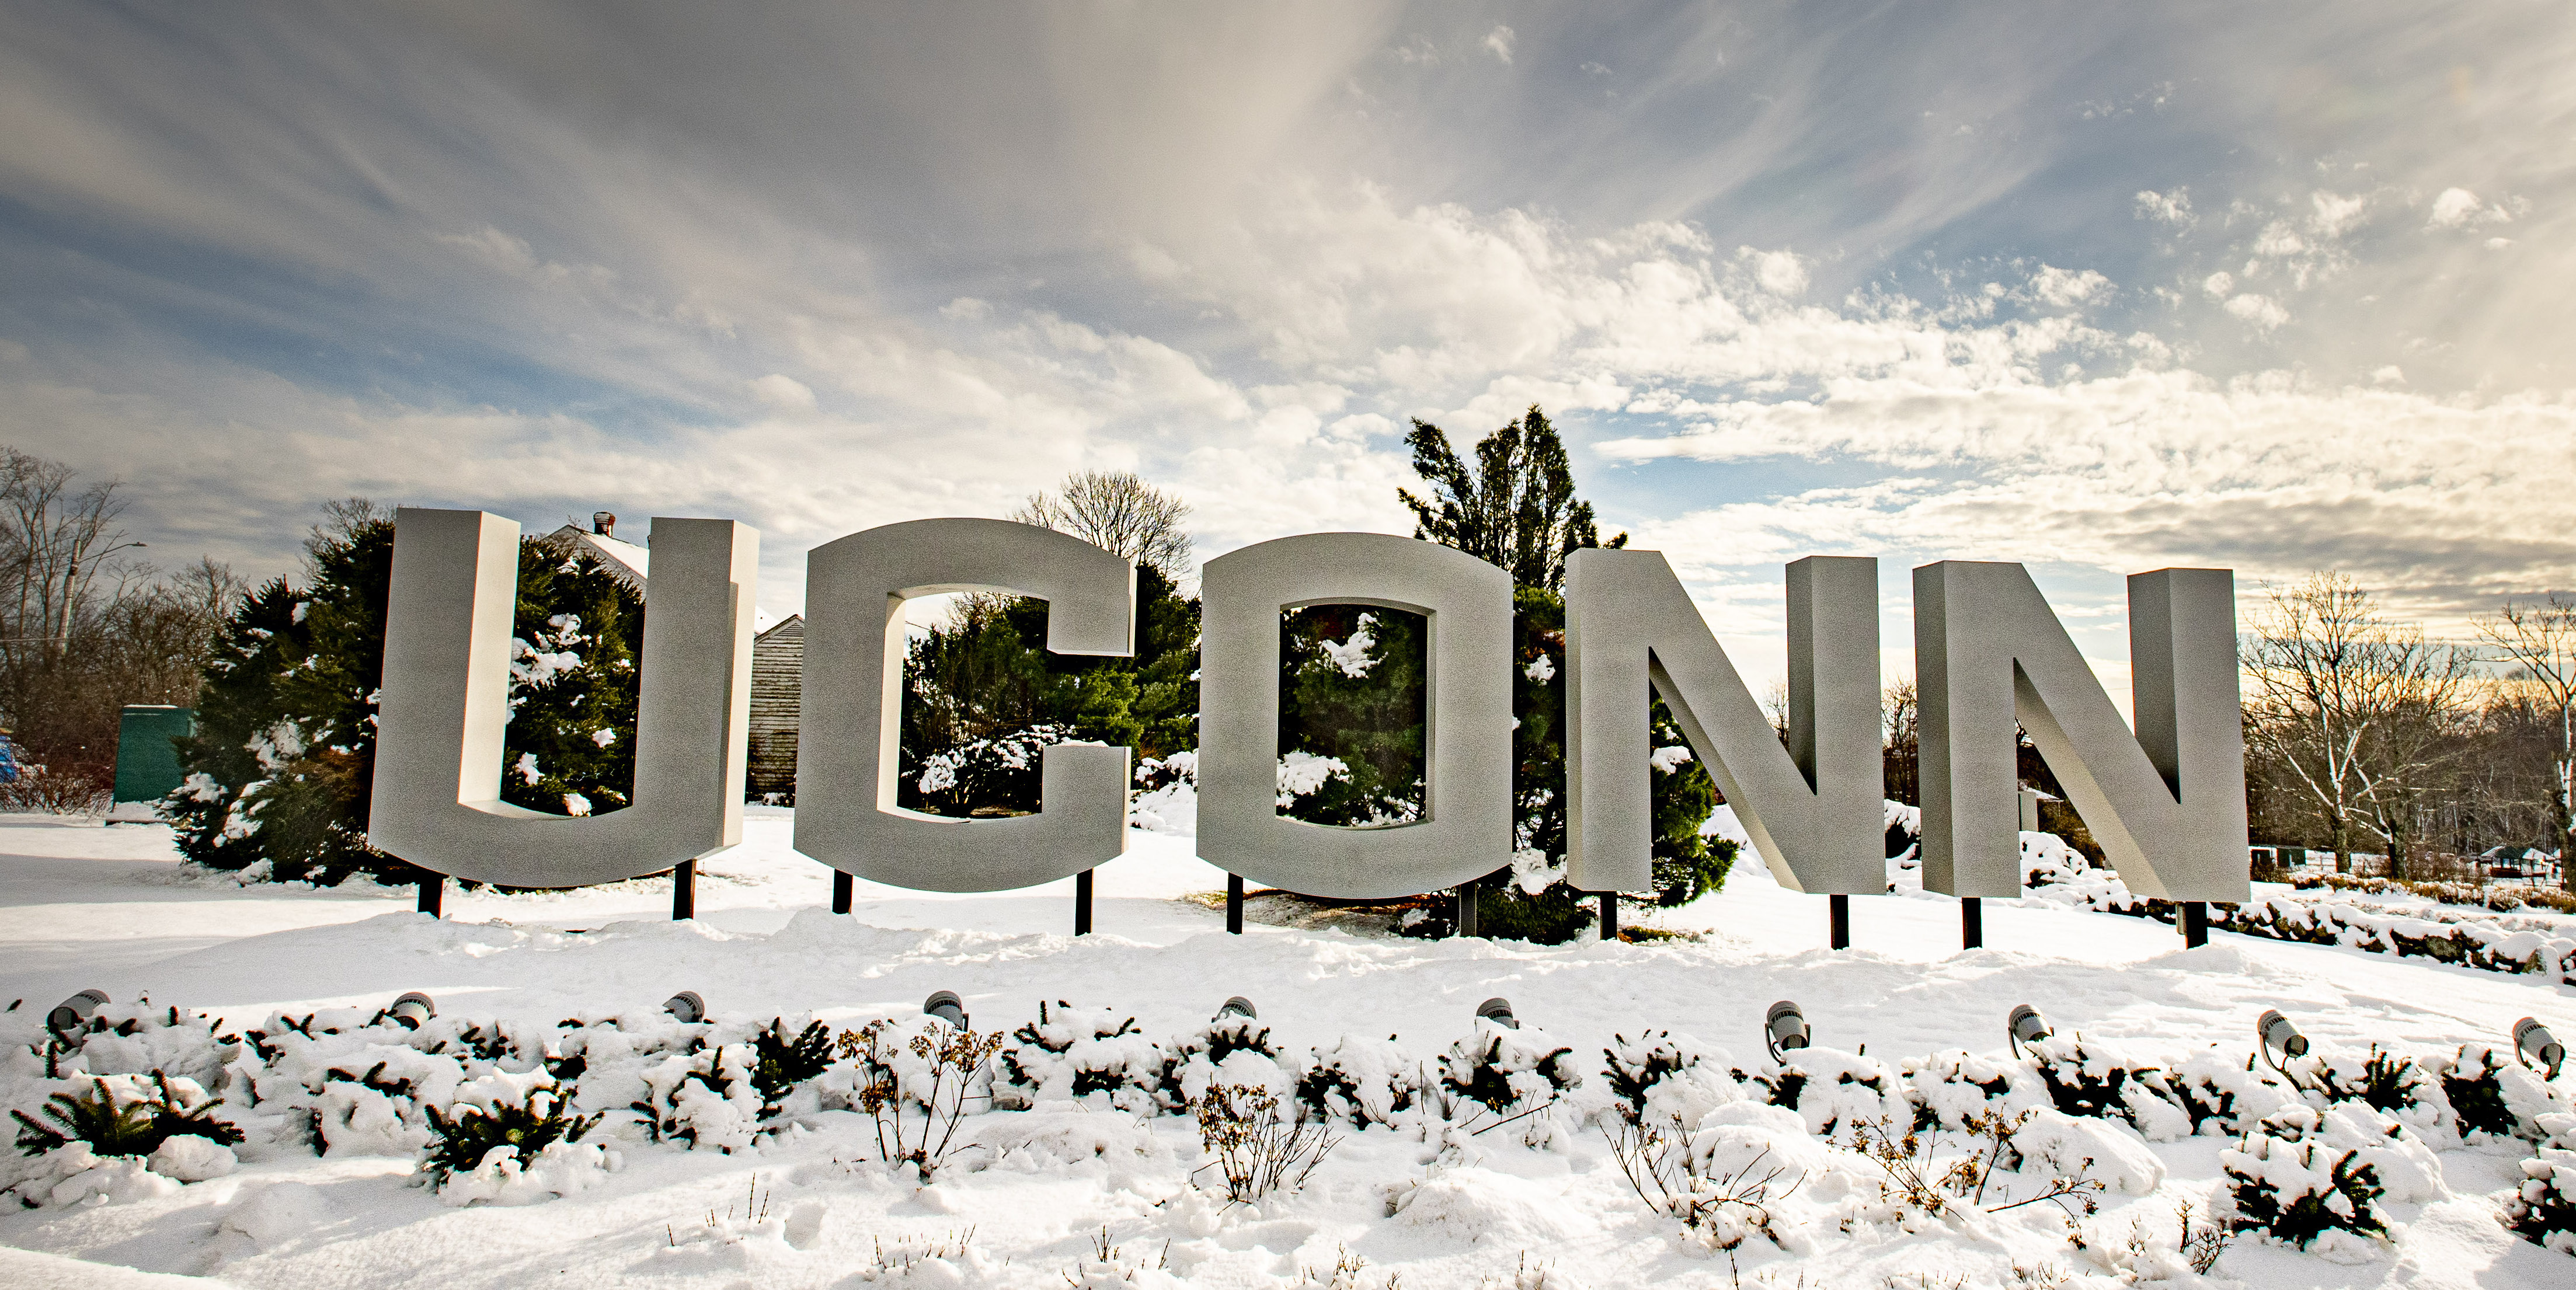 Gateway UConn sign surrounded by snow